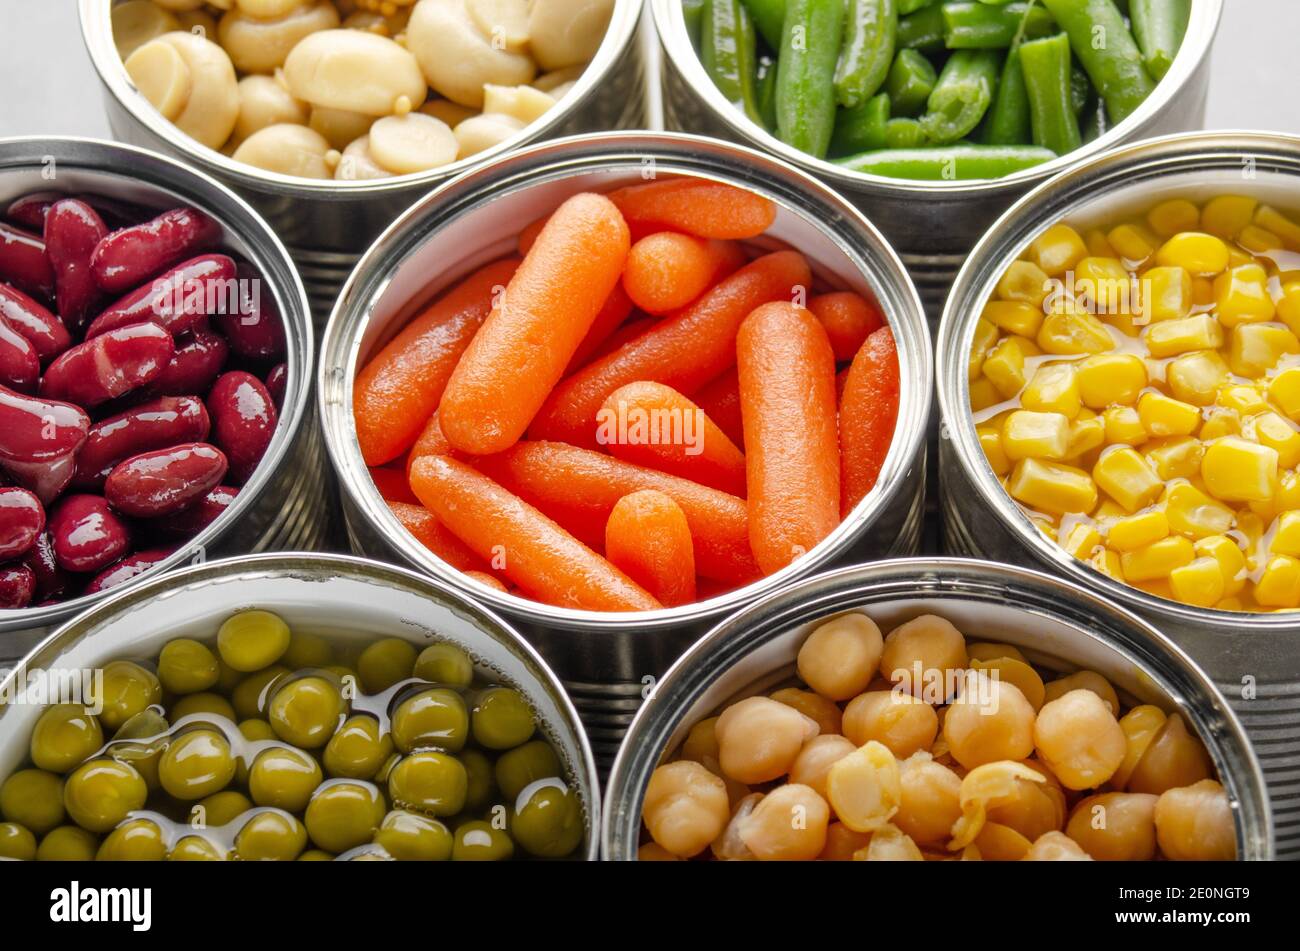 Non Perishable Foods High Resolution Stock Photography and Images - Alamy